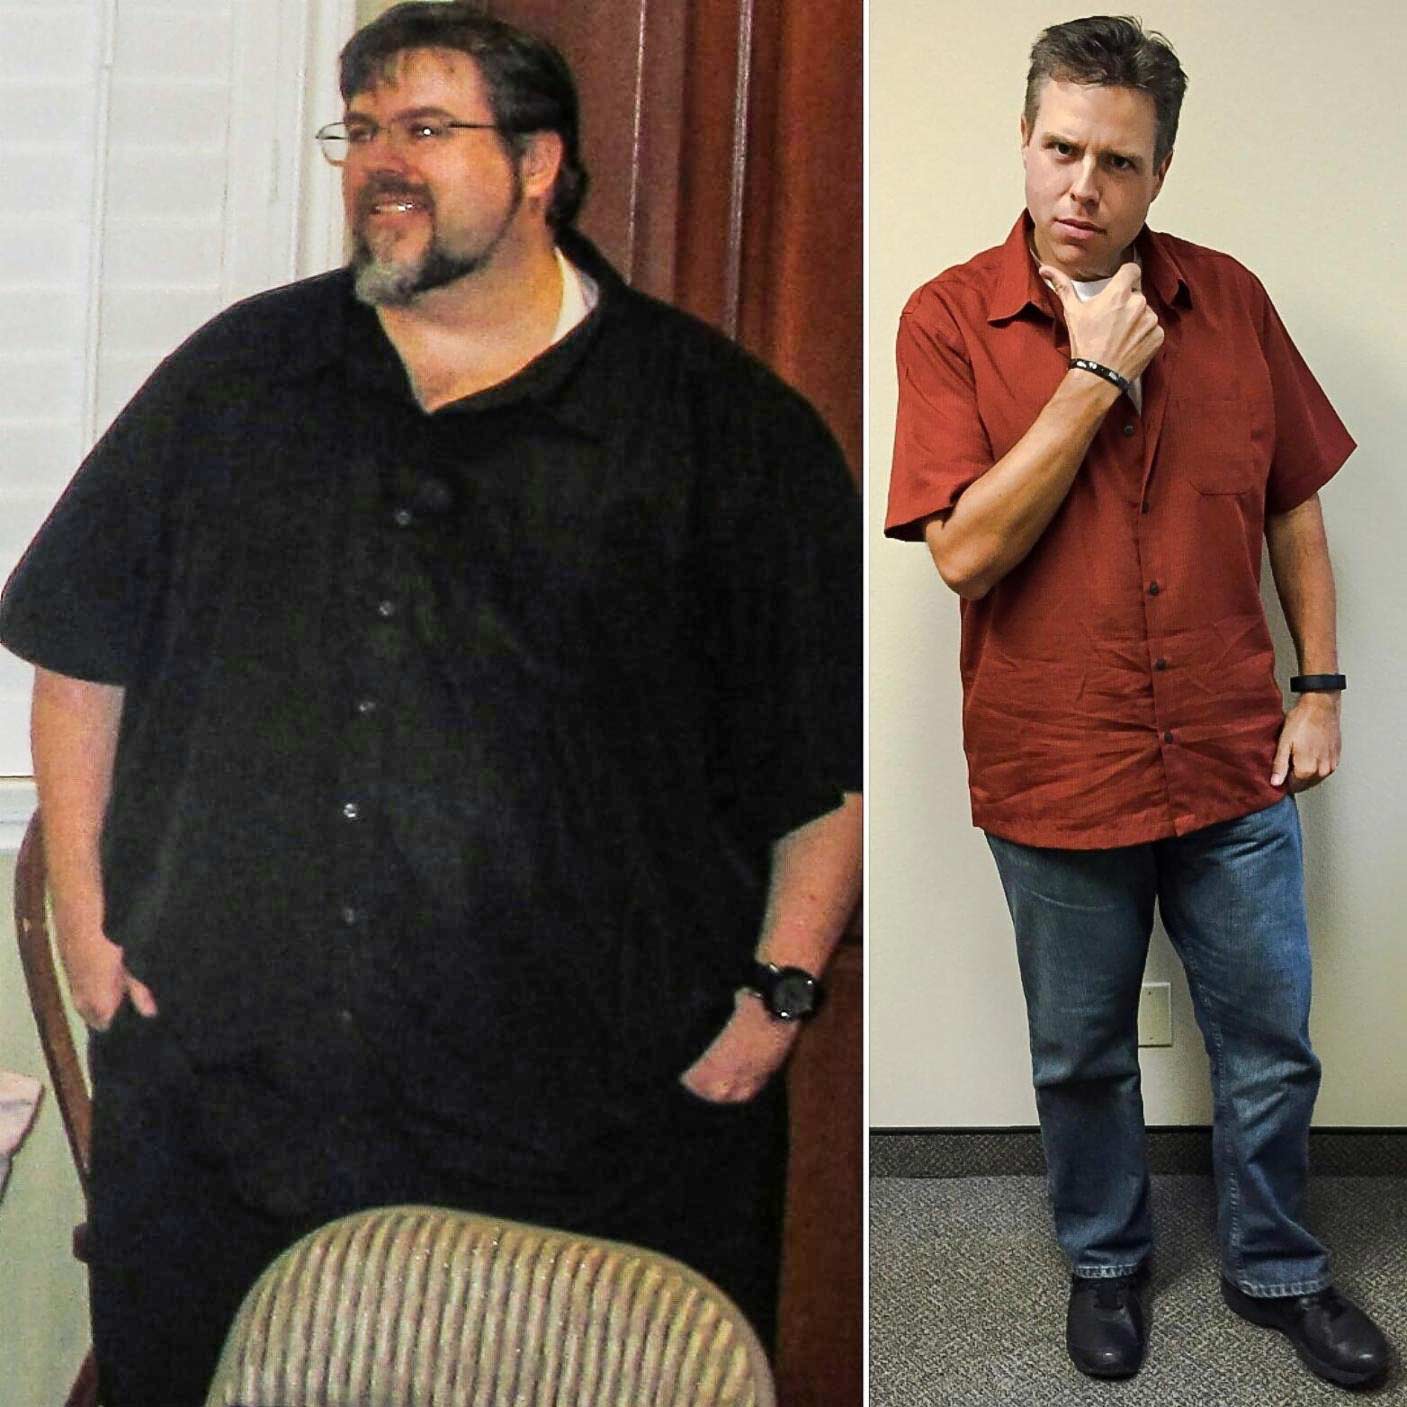 losing a total of 245 lbs